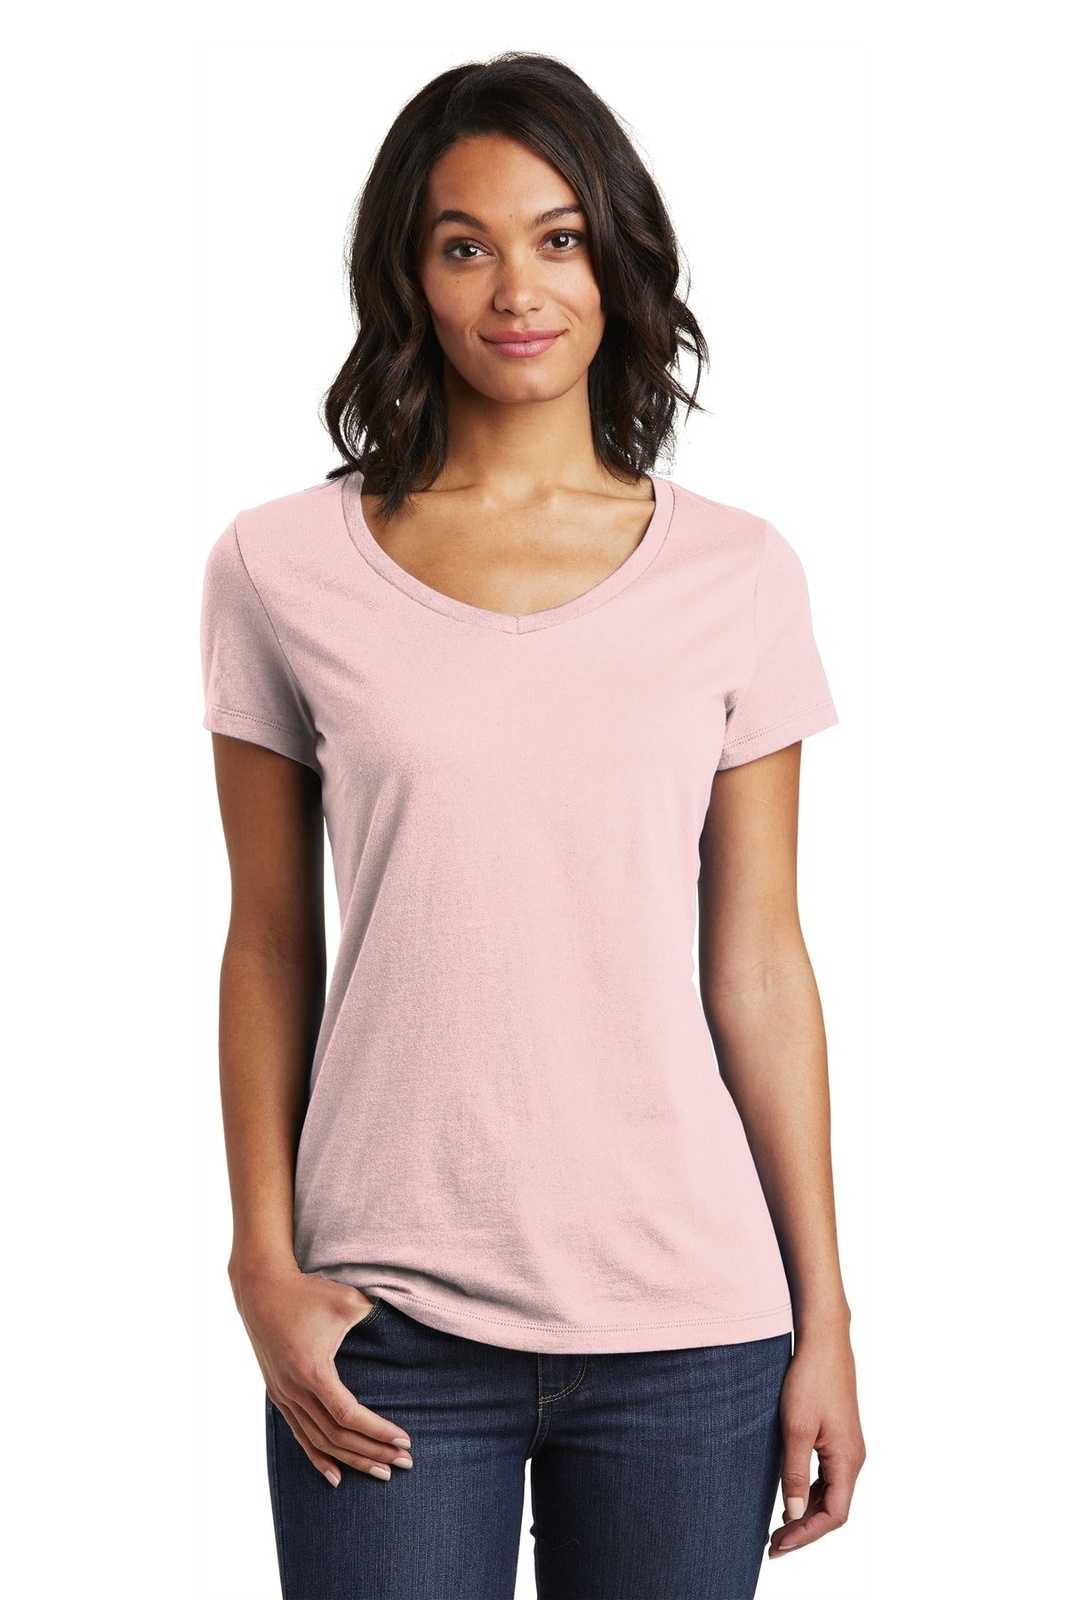 District DT6503 Women's Very Important Tee V-Neck - Dusty Lavender - HIT a Double - 1